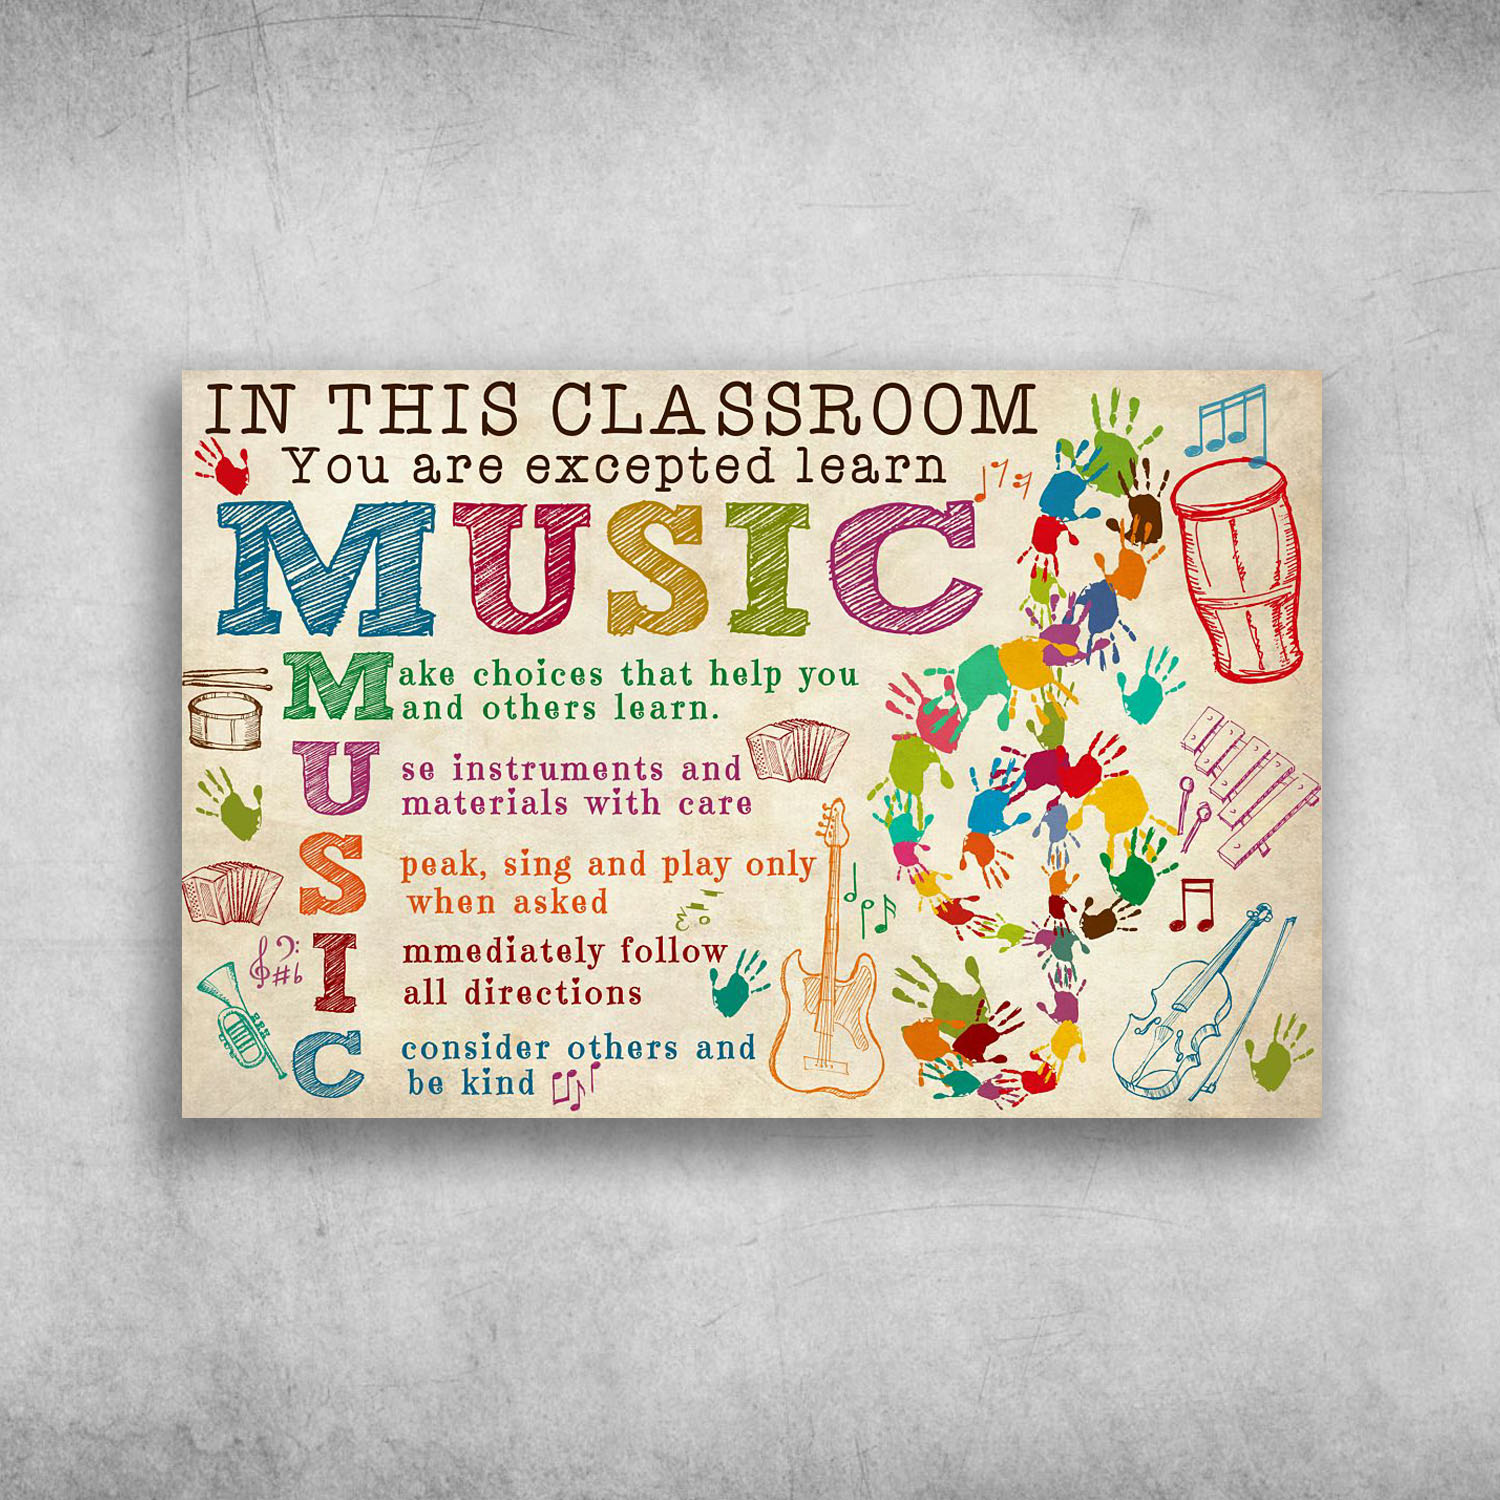 In This Classroom You Are Excepted Learn Music